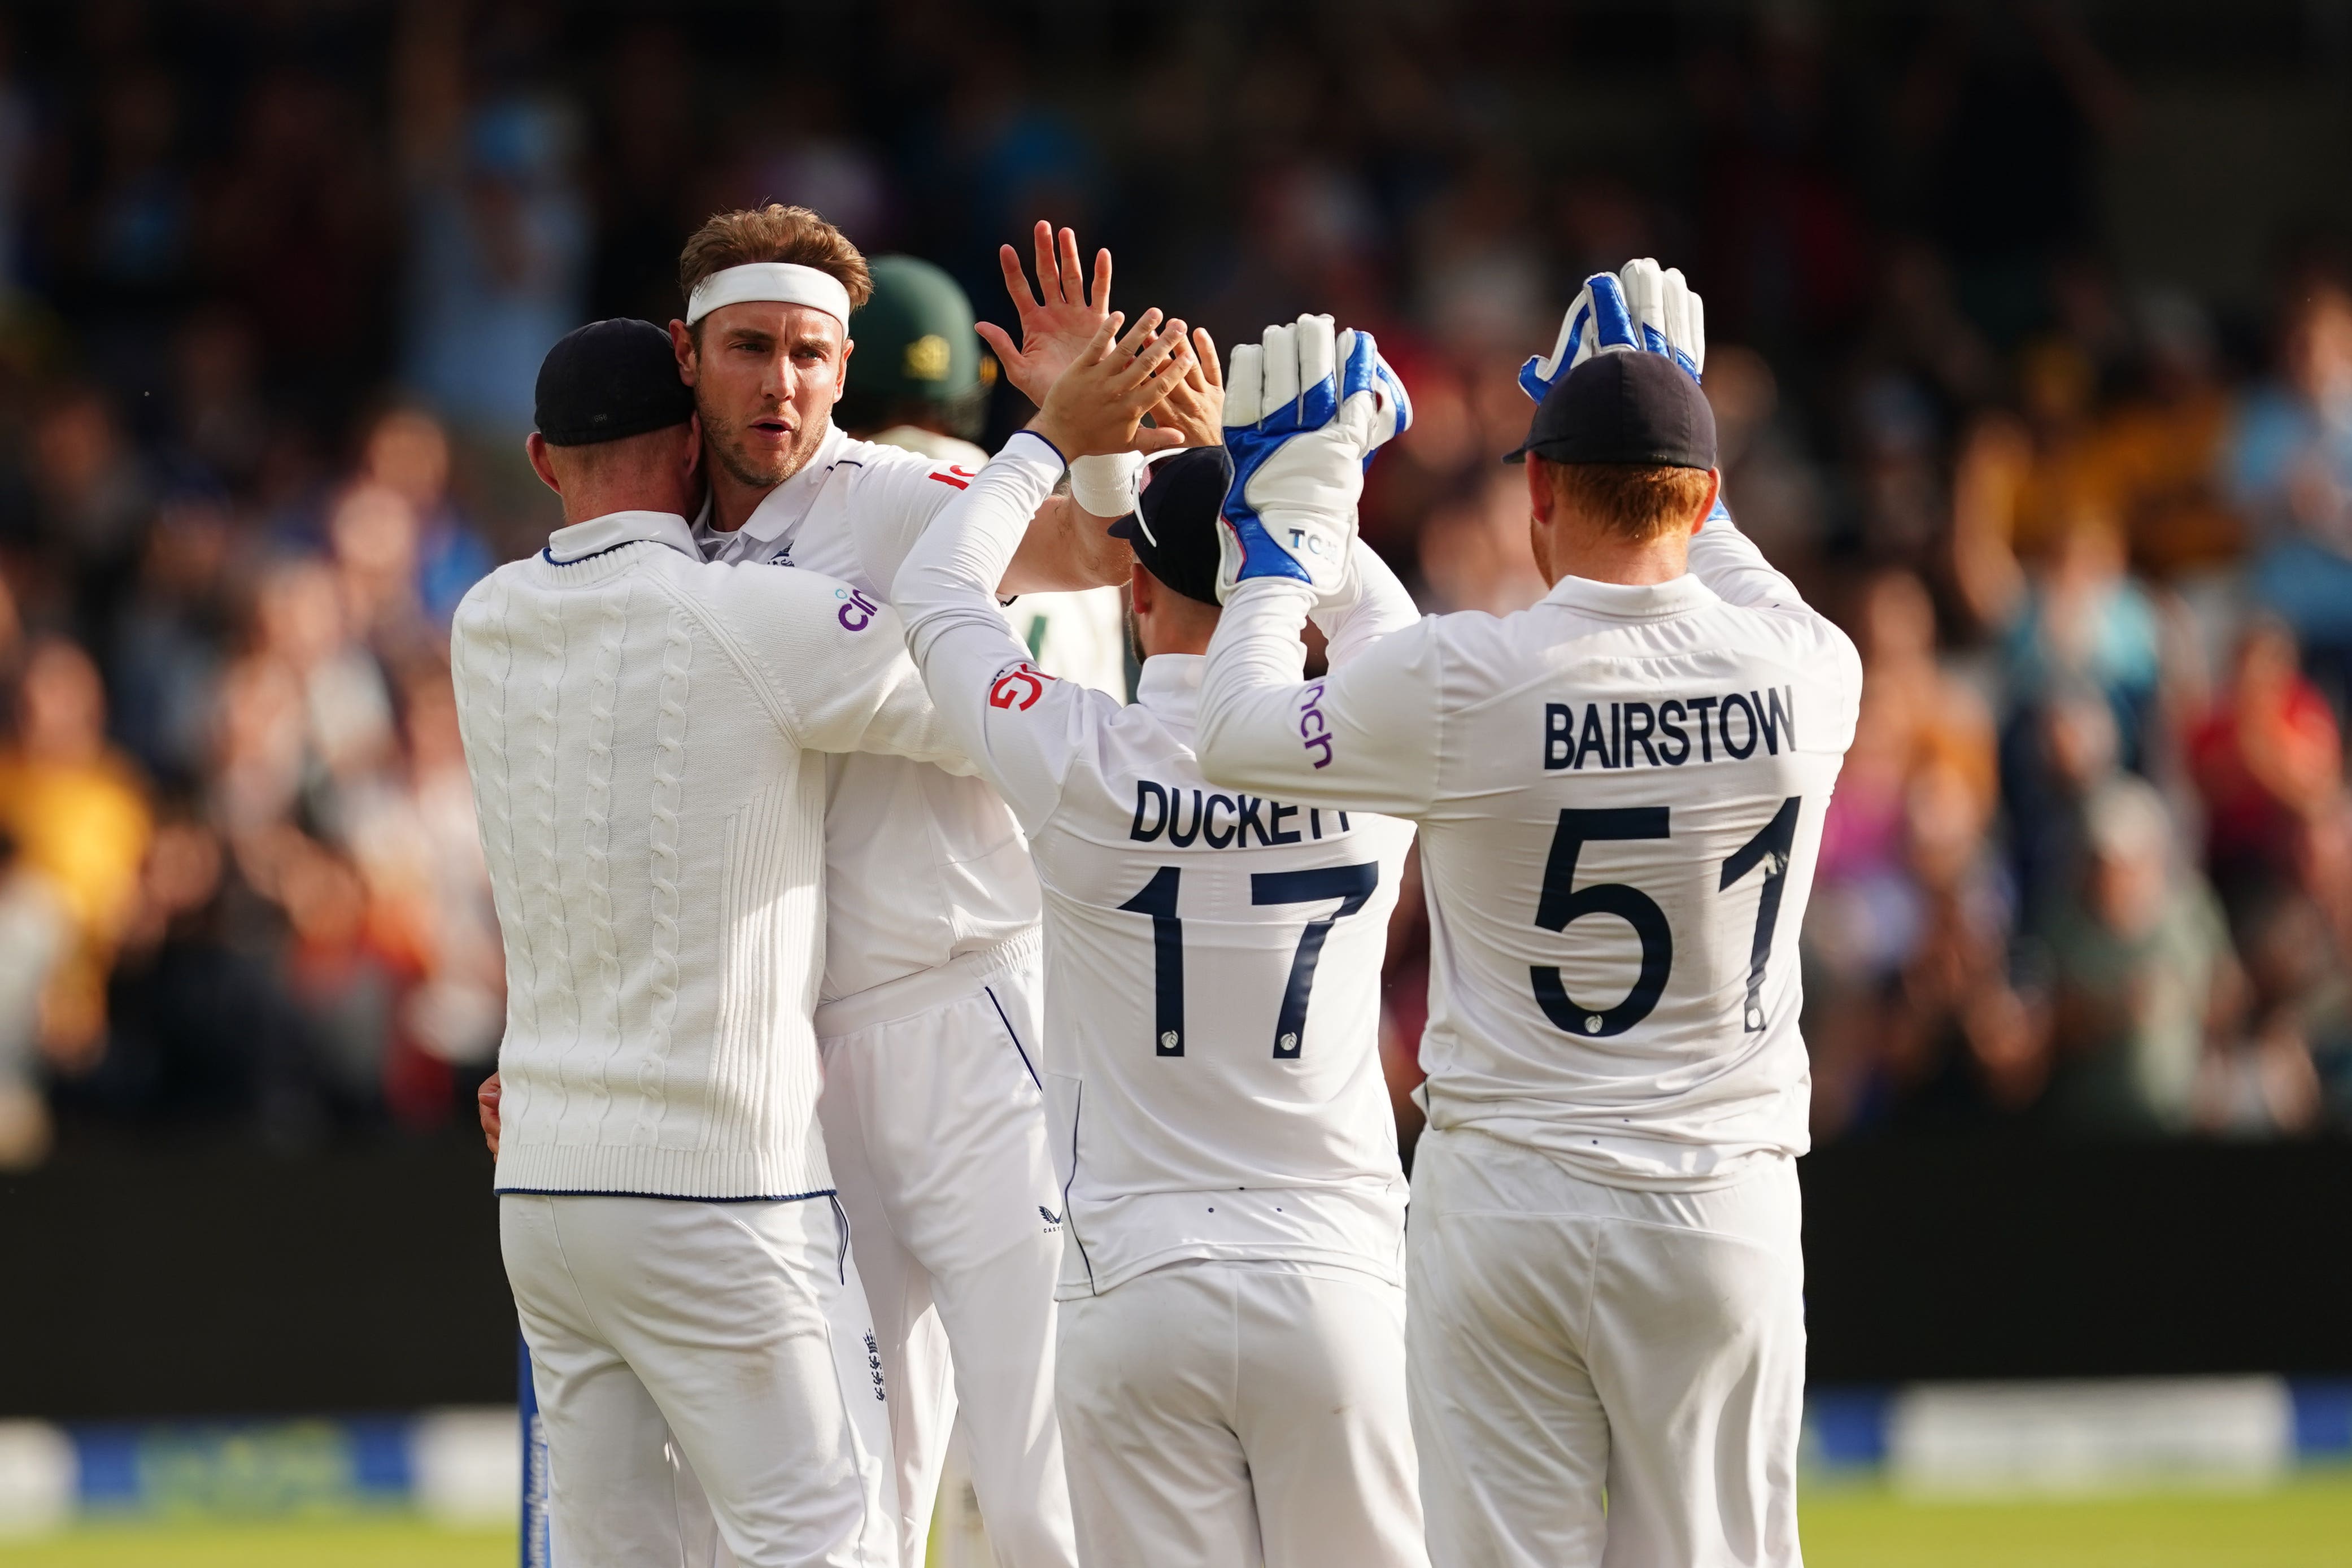 Day four of third Ashes Test: England chasing 251 for victory at